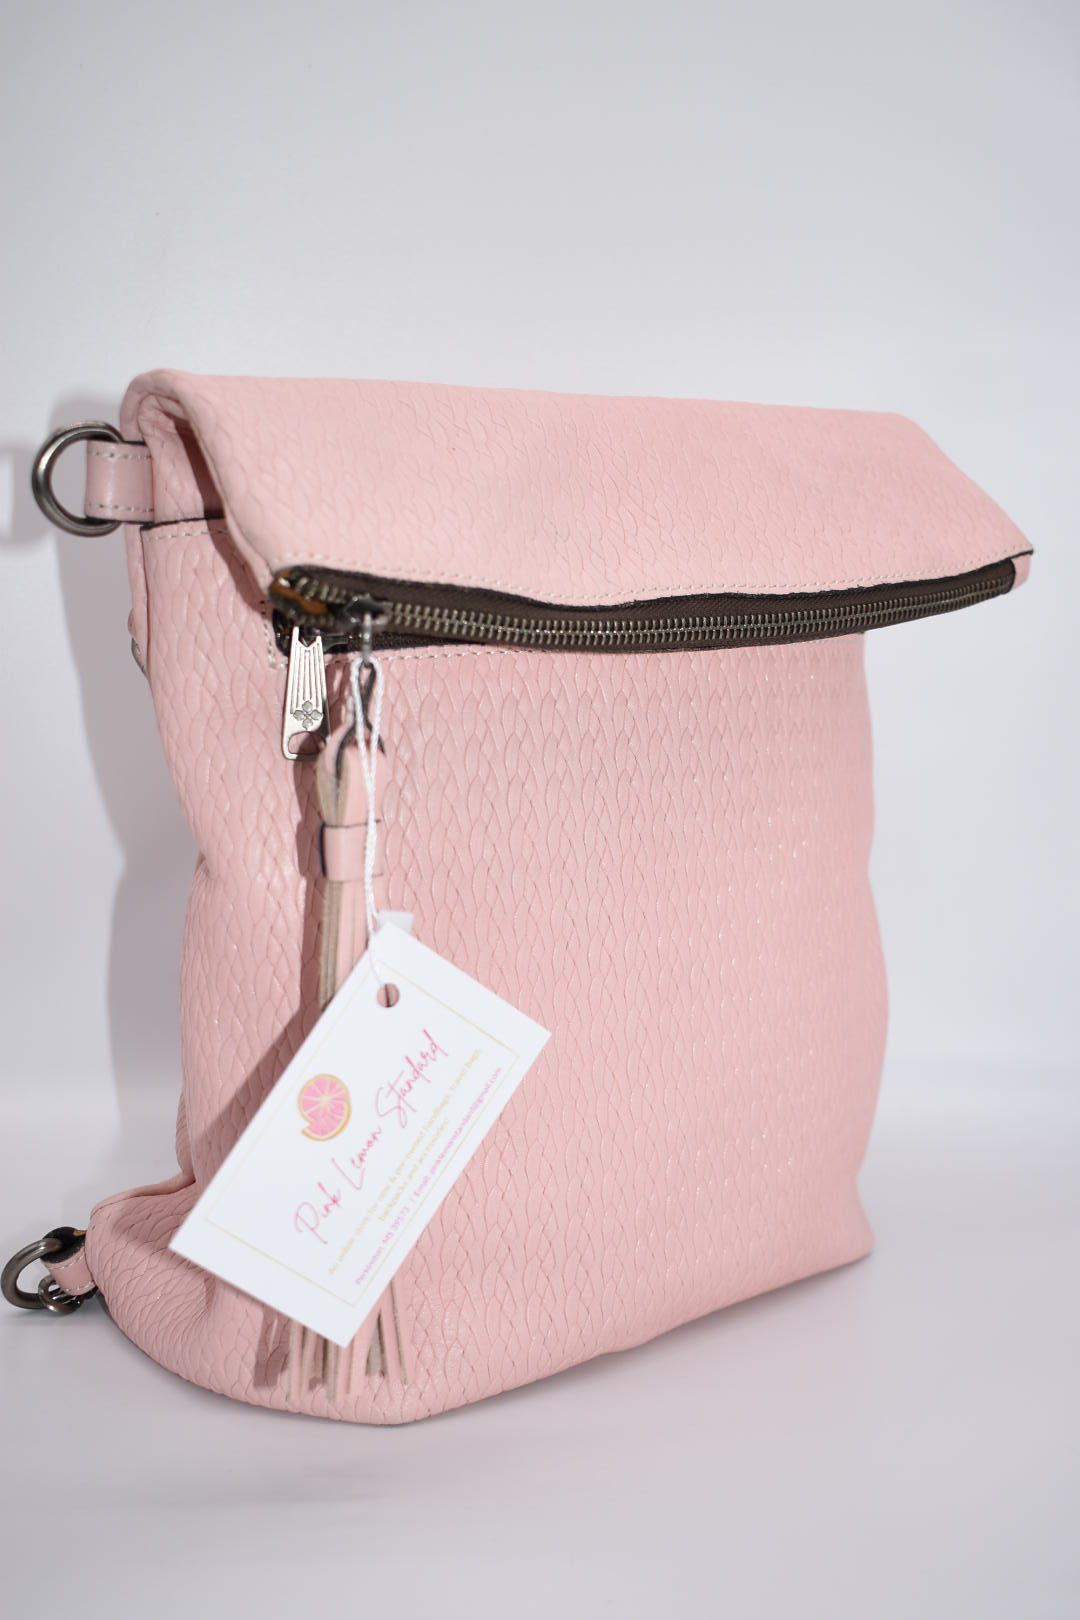 Patricia Nash Luzille Convertible Backpack Twisted Woven Pink